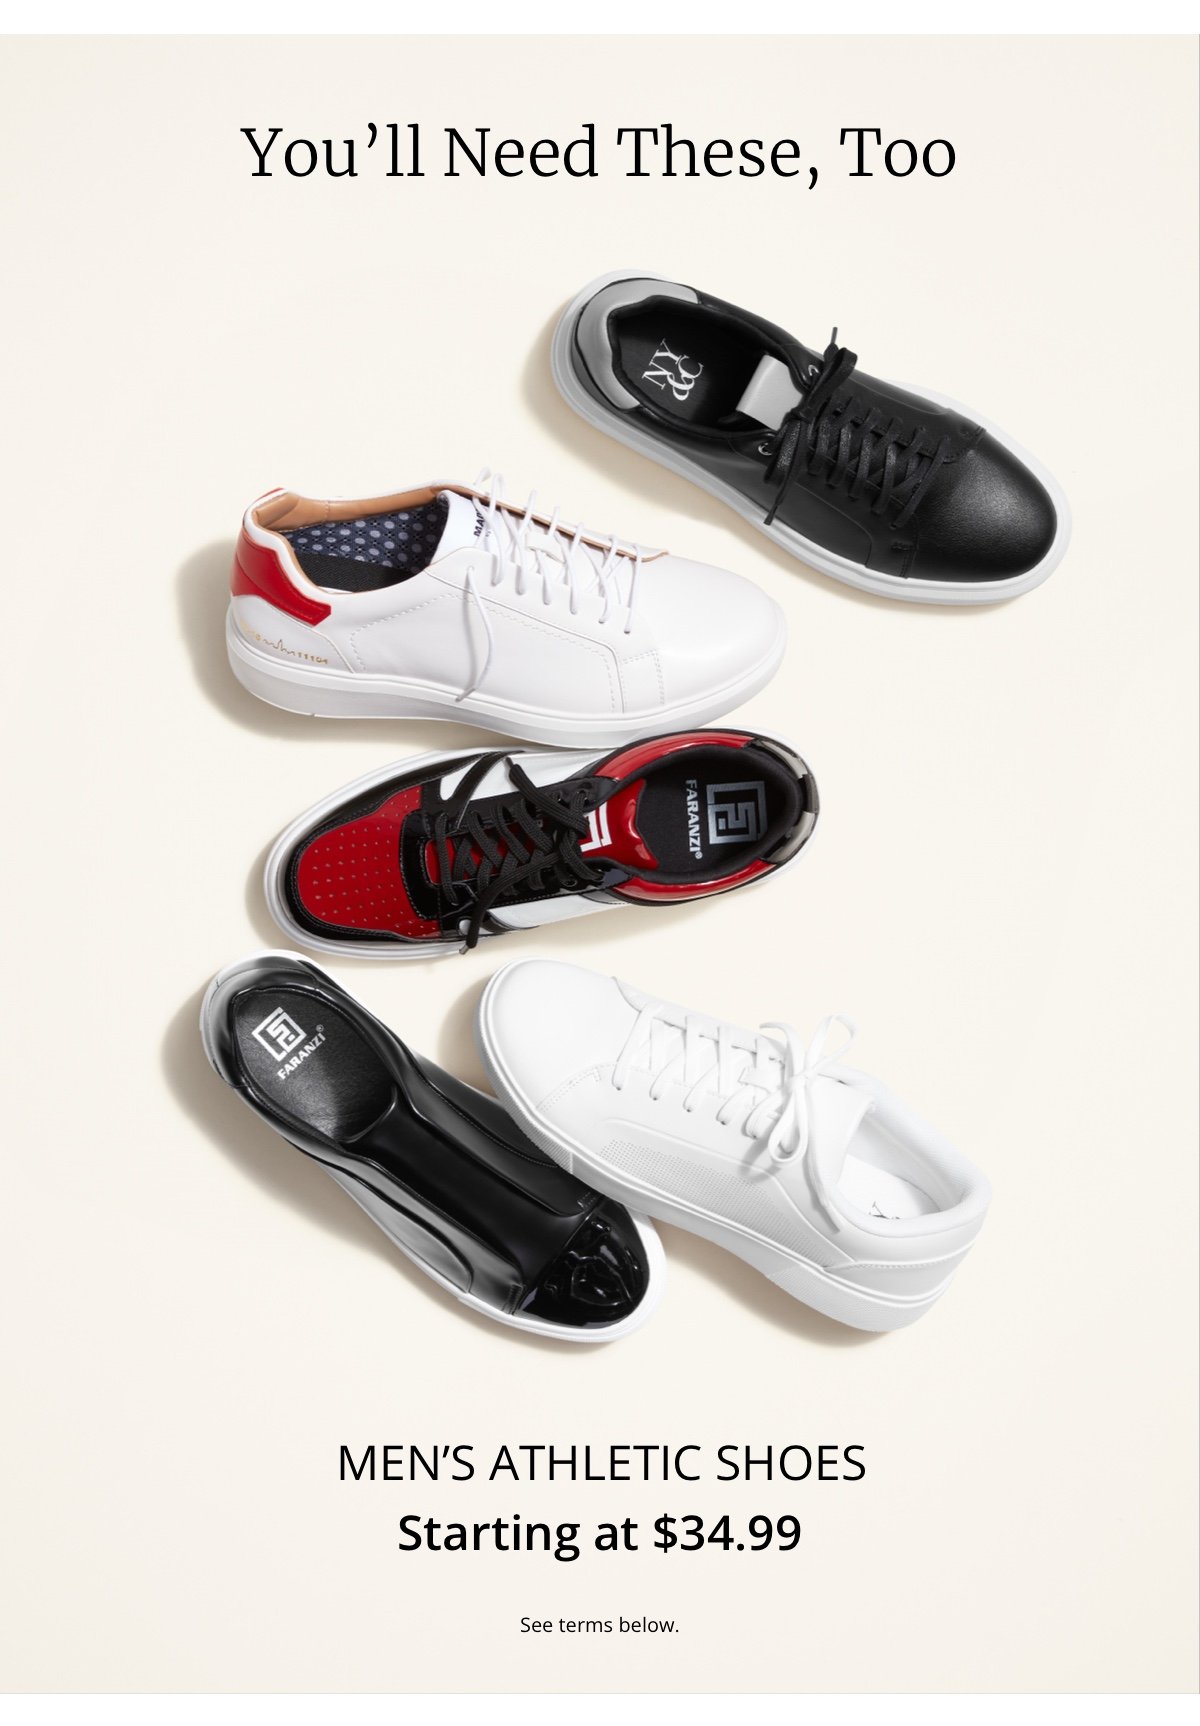 You ll Need These, Too|Men s Athletic Shoes Starting at \\$34.99. See terms below.